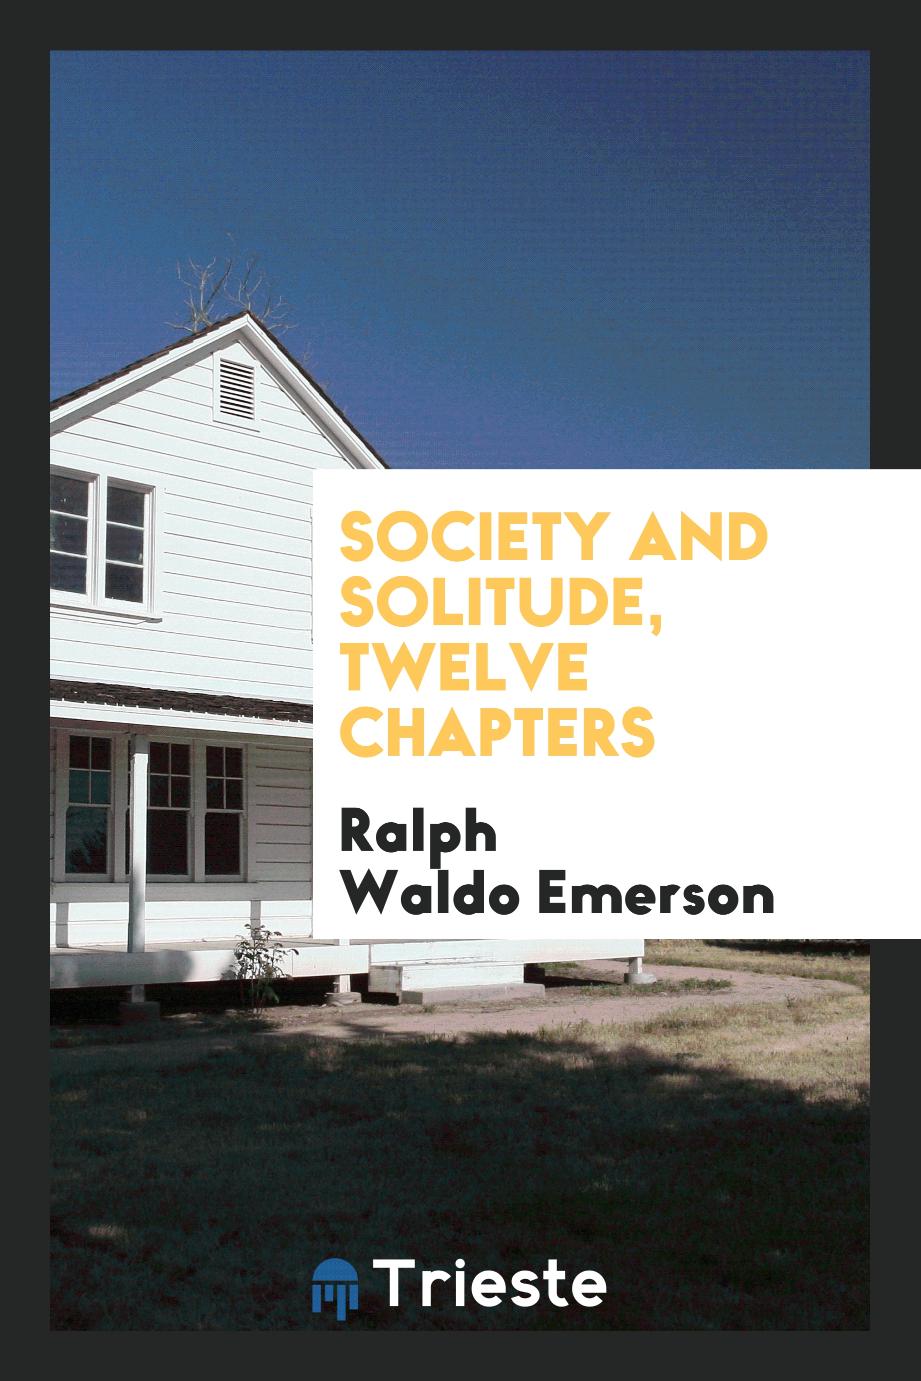 Society and solitude, twelve chapters